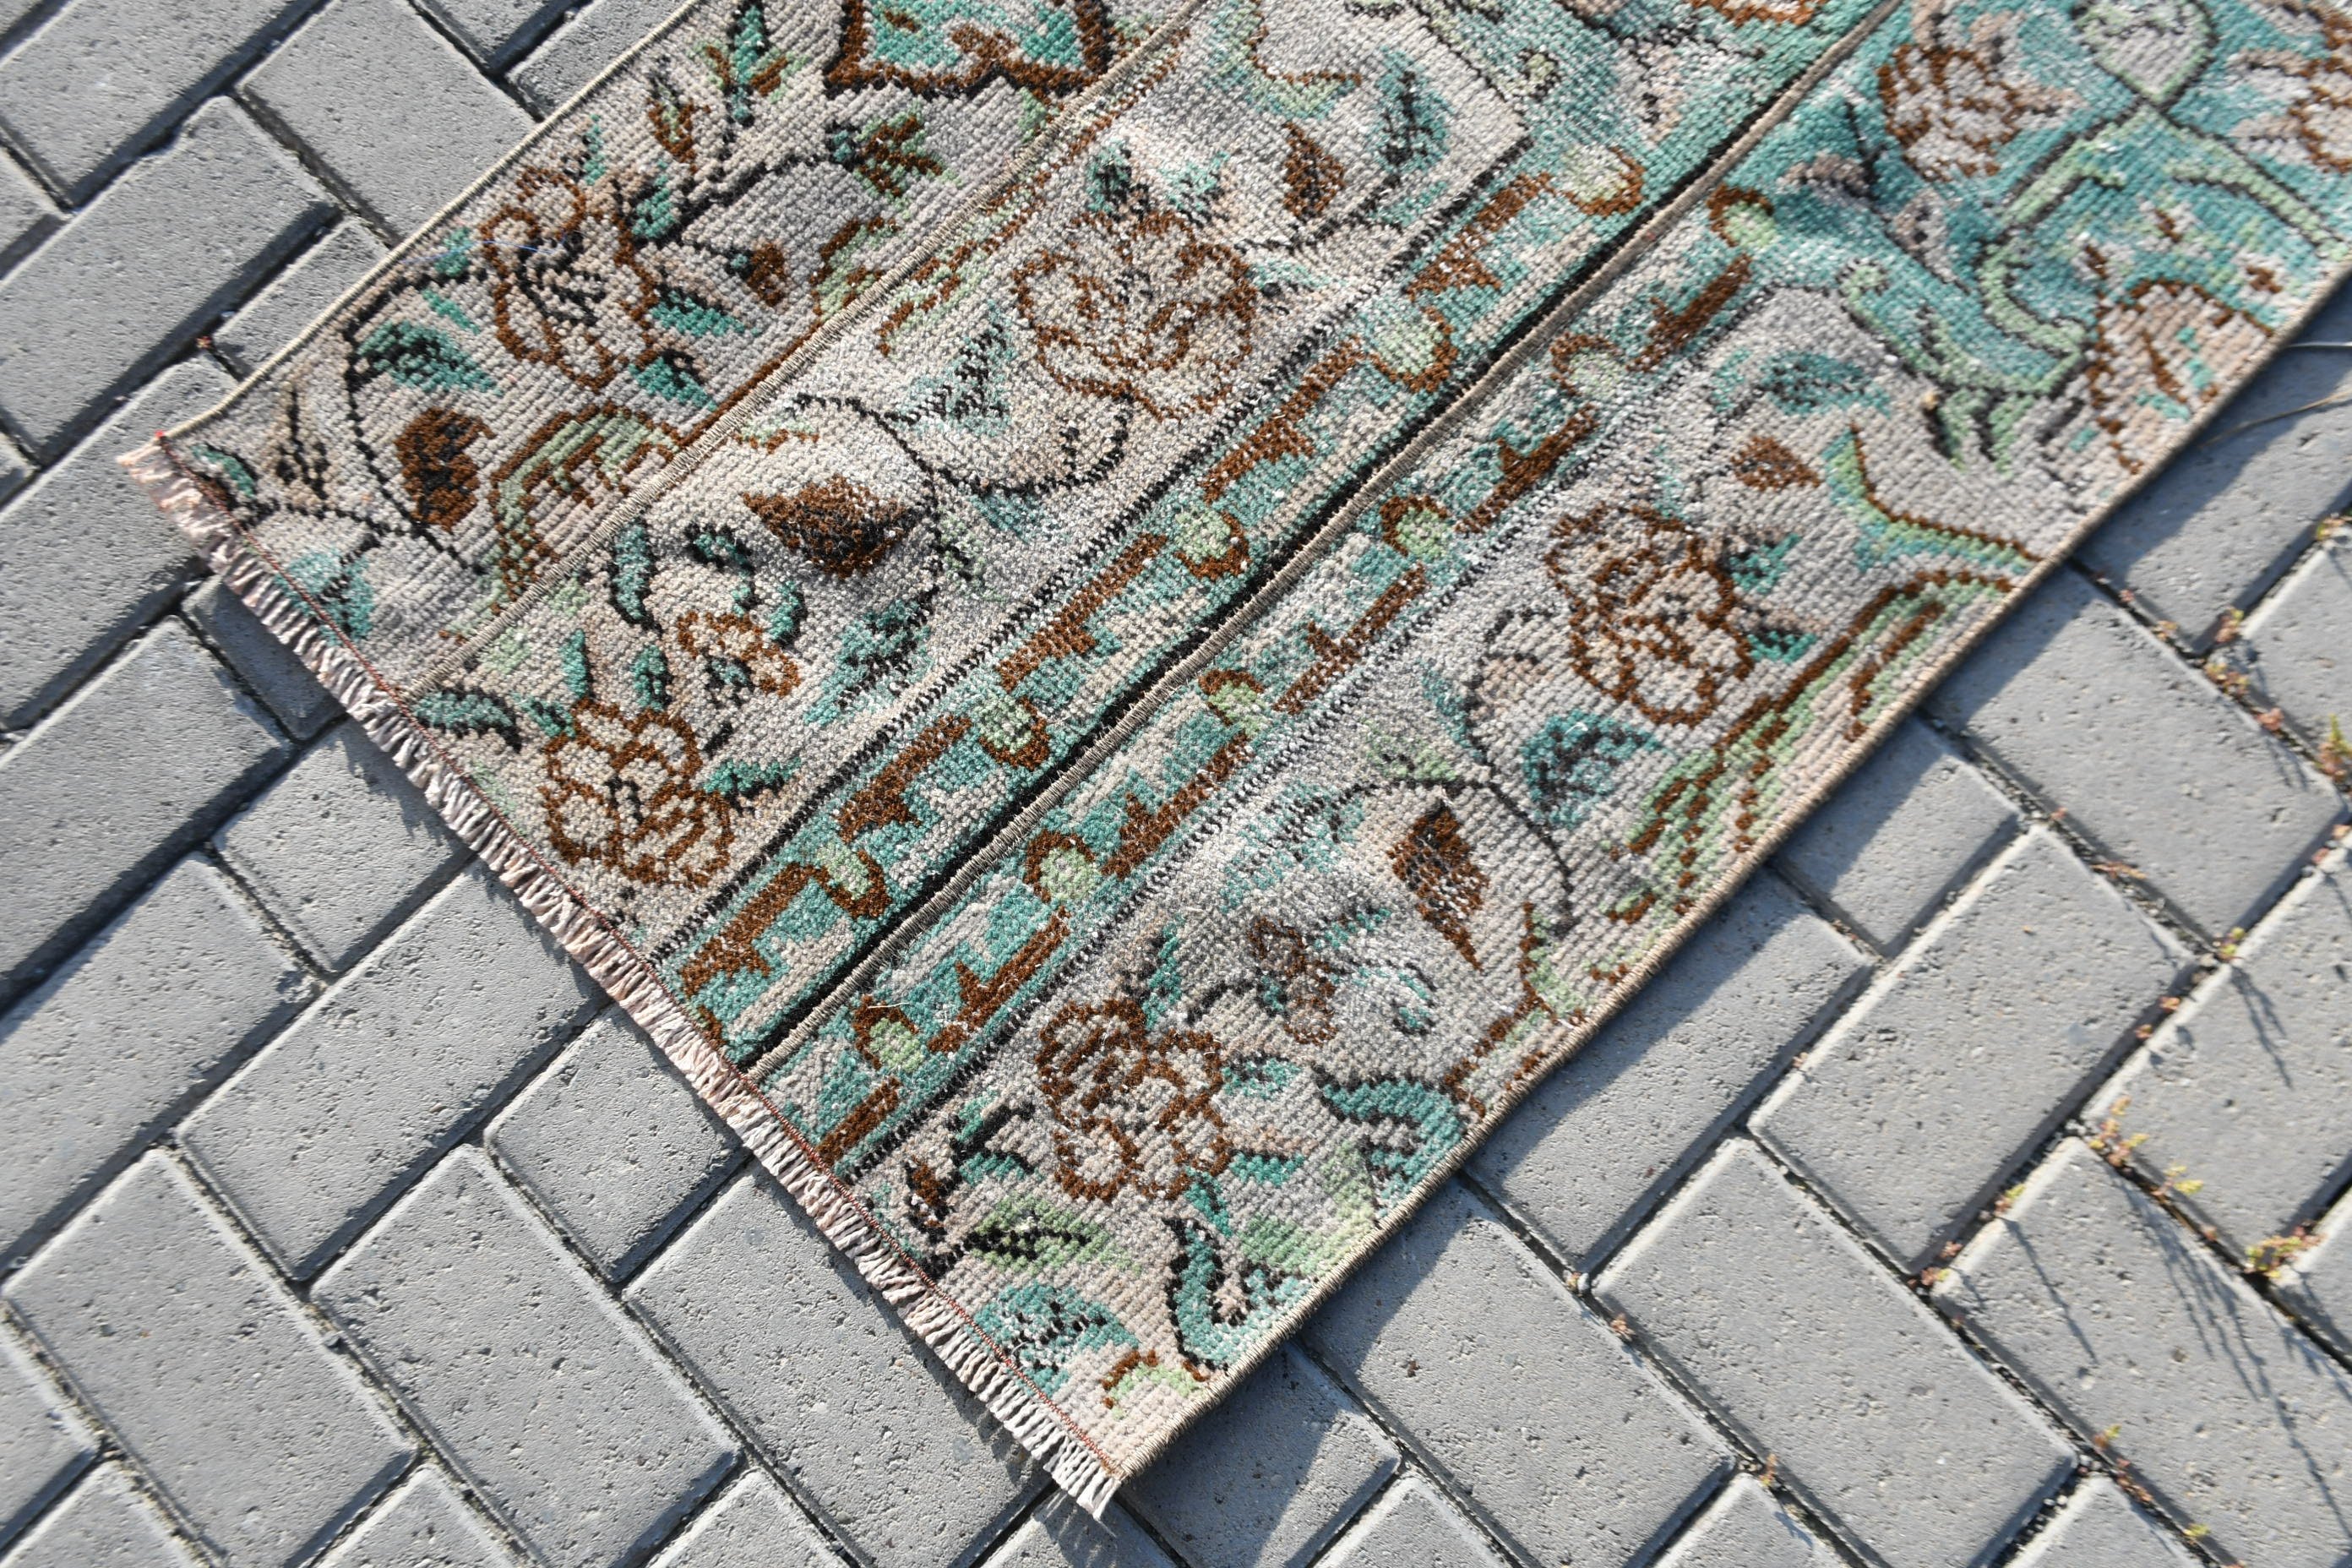 Entry Rug, 2.3x3 ft Small Rug, Home Decor Rug, Vintage Rug, Wall Hanging Rugs, Turkish Rug, Wool Rugs, Rugs for Bedroom, Green Cool Rug